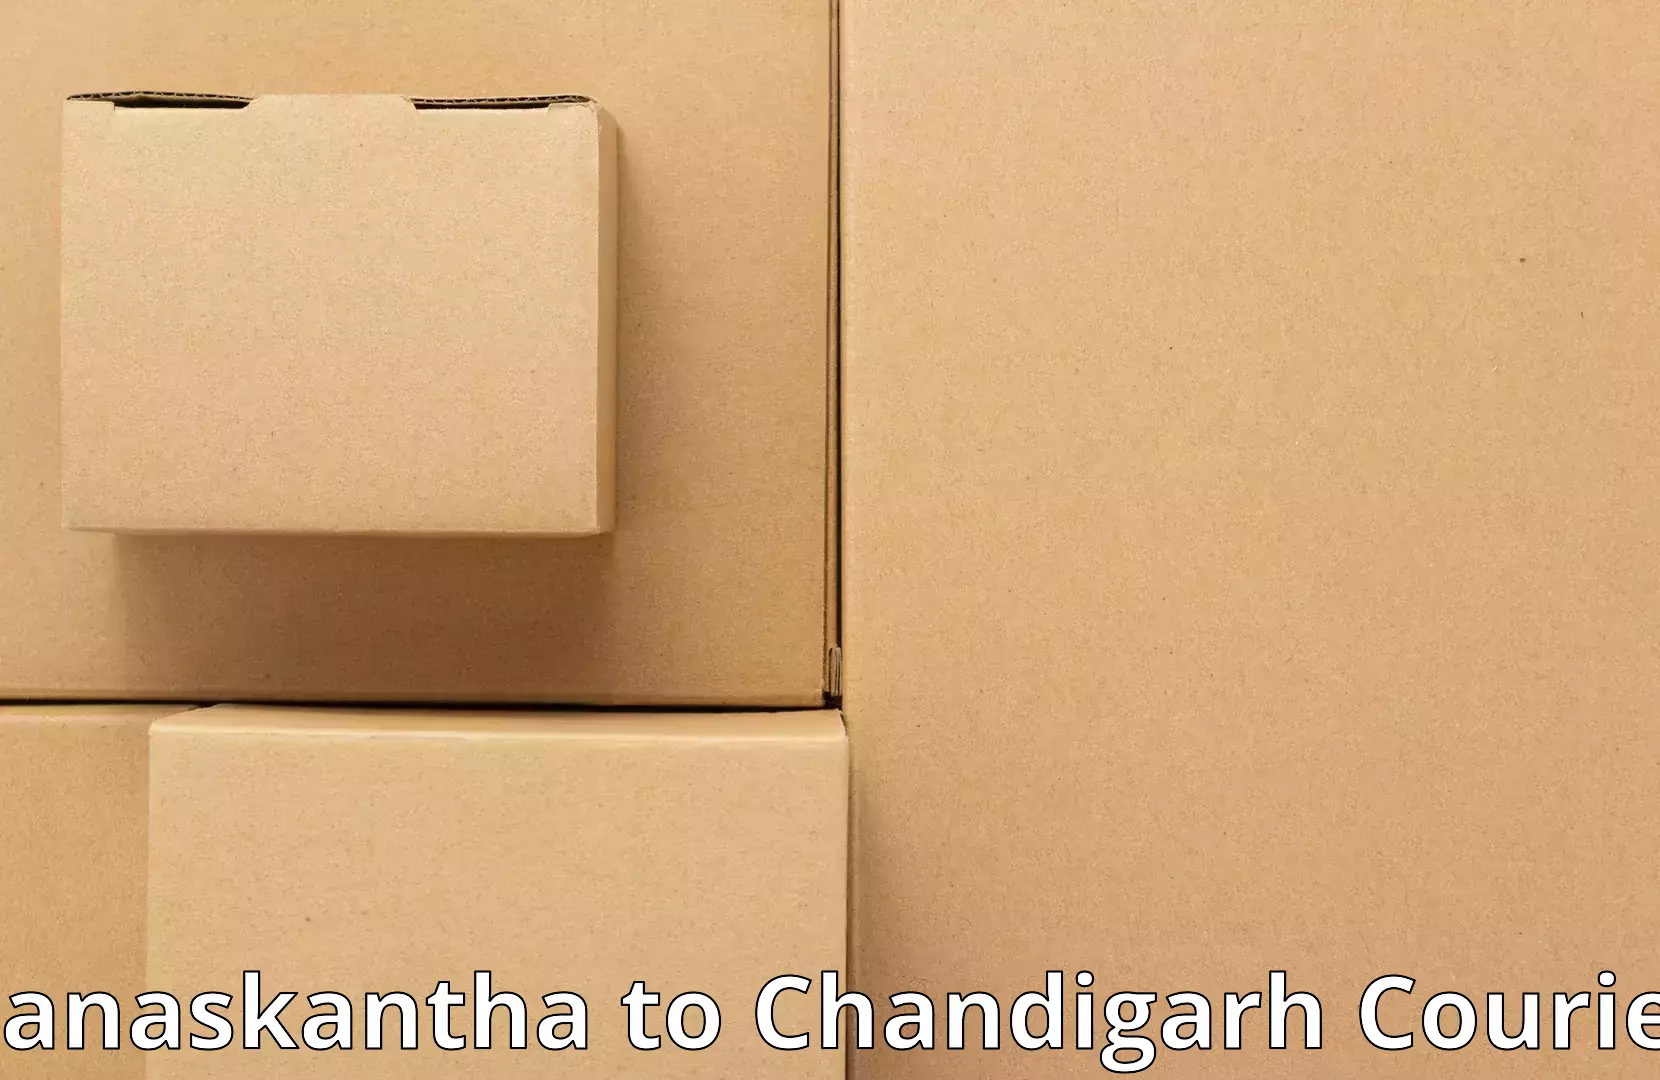 Specialized moving company Banaskantha to Chandigarh